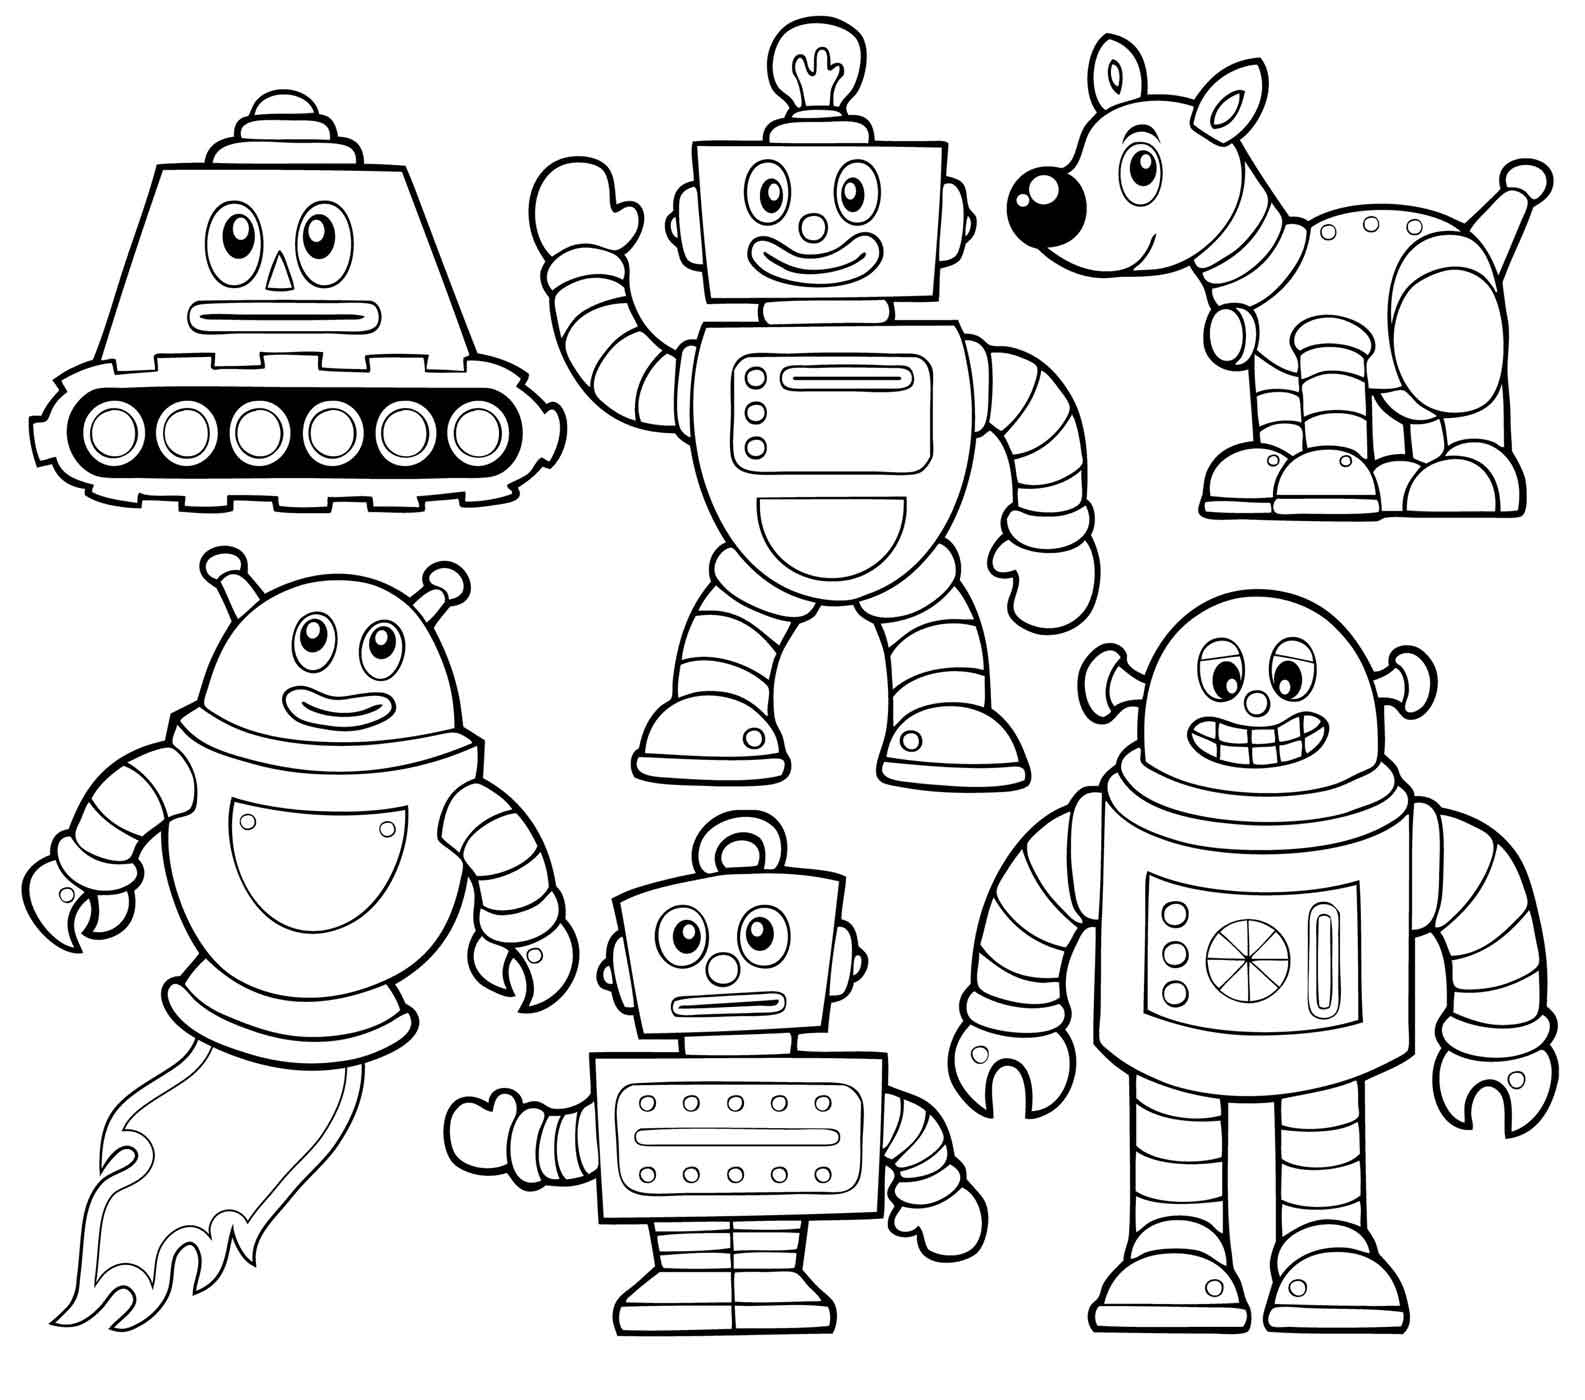 robot-coloring-pages-for-kids-17 « Preschool and Homeschool